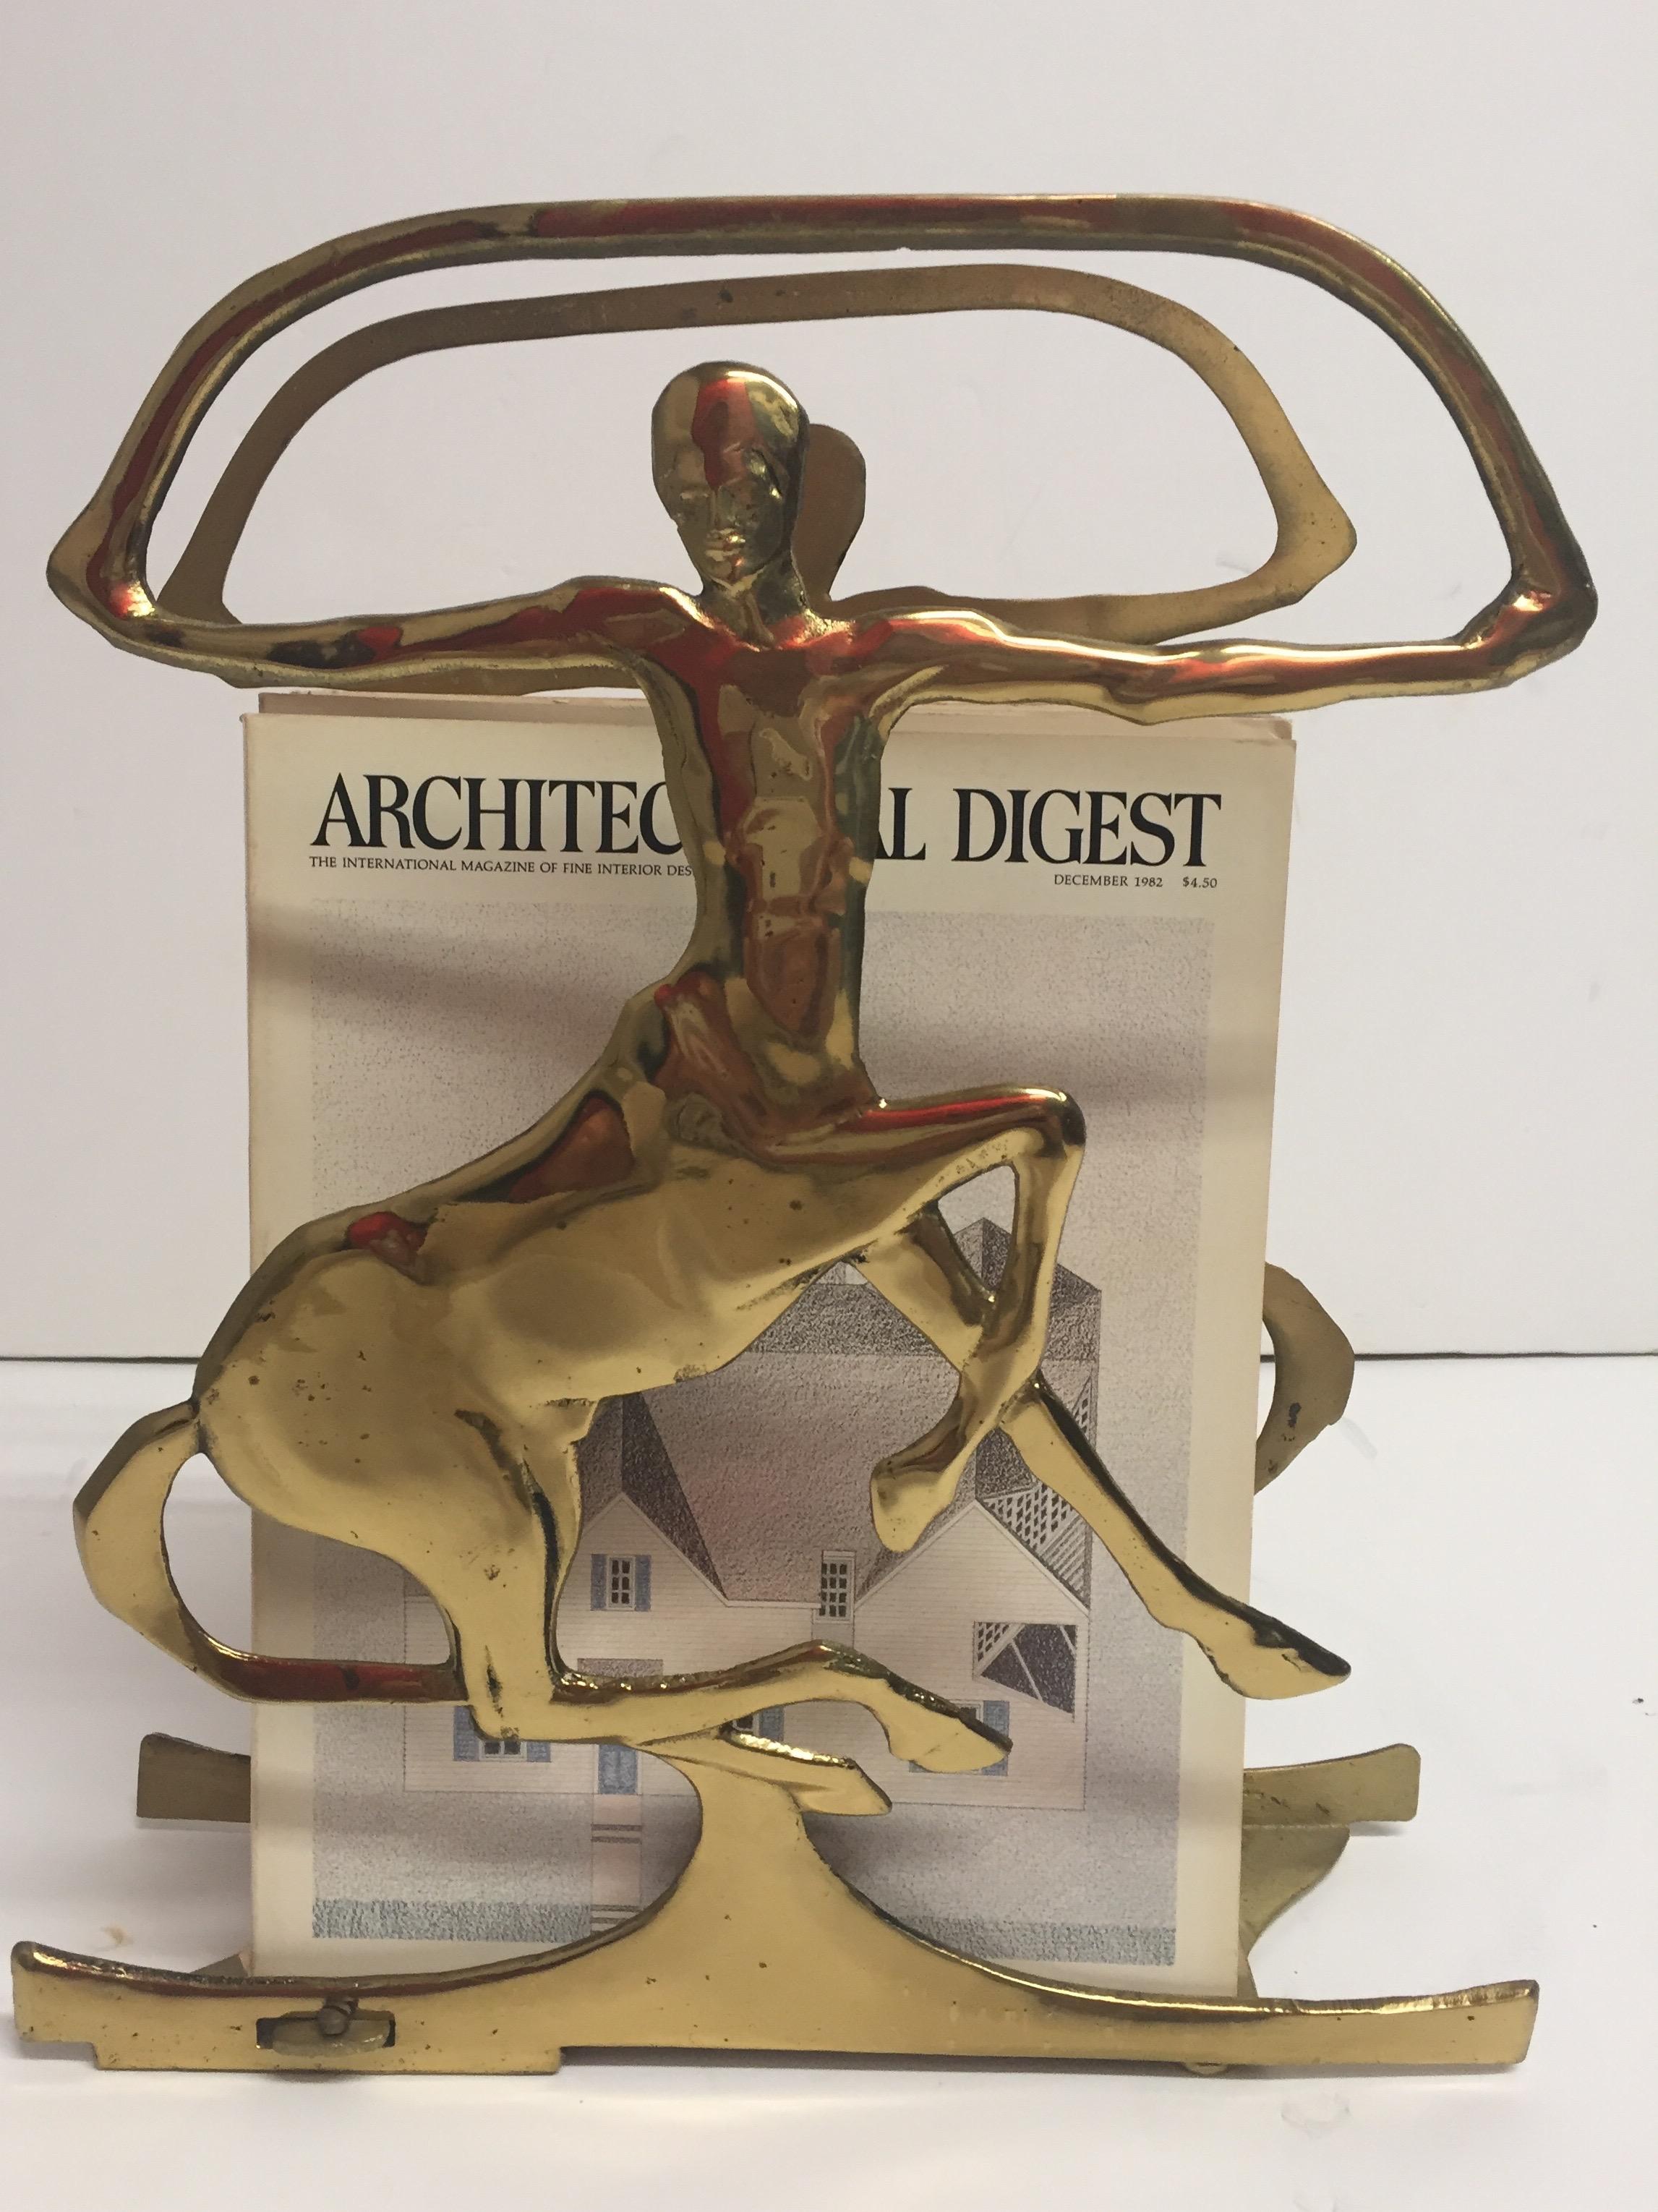 A brass sculptural magazine rack with the poetic shape of a Satyr, part man part horse.
Depth is adjustable to get smaller.